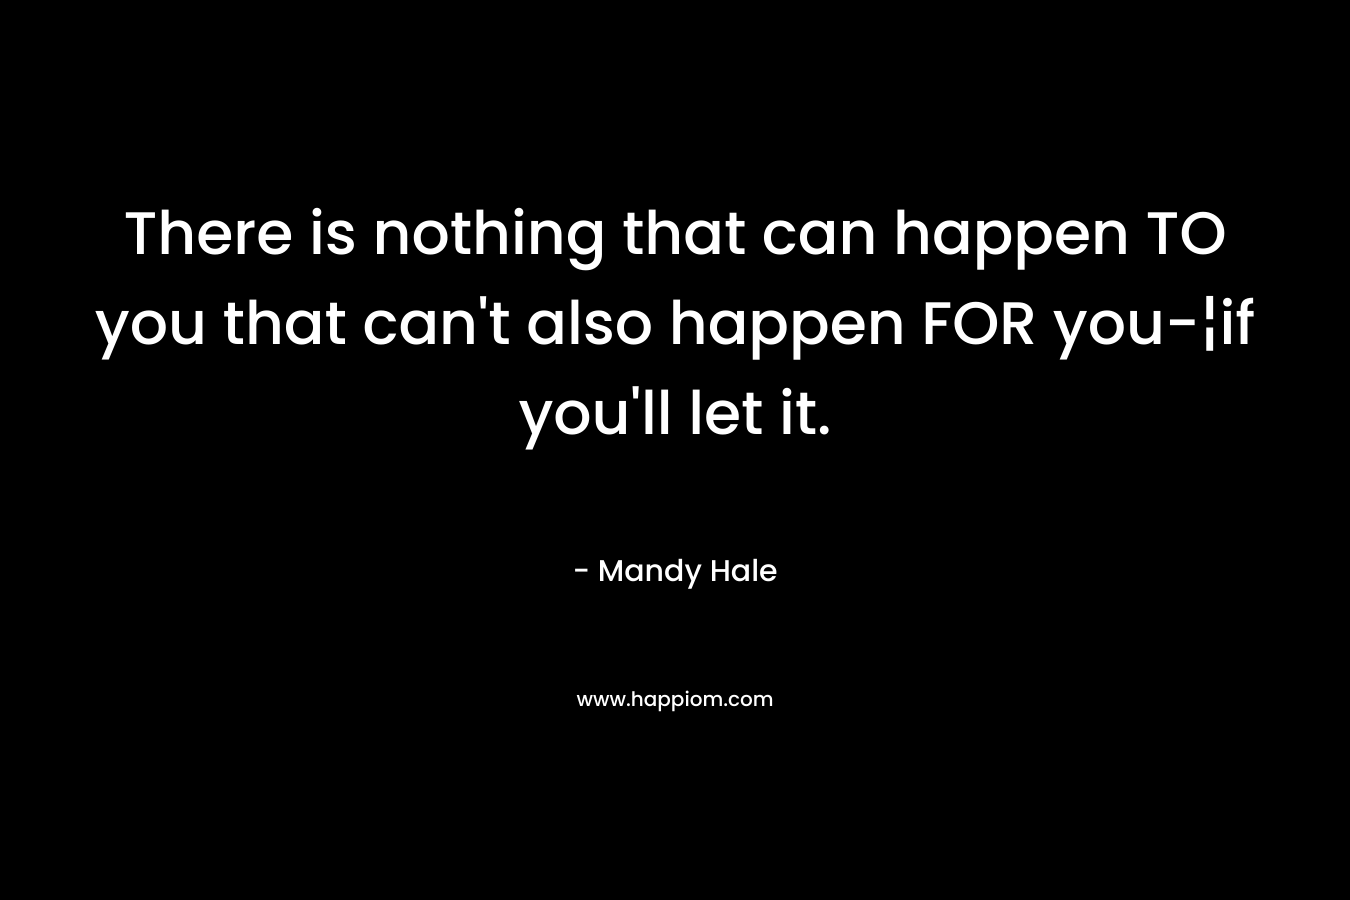 There is nothing that can happen TO you that can't also happen FOR you-¦if you'll let it.